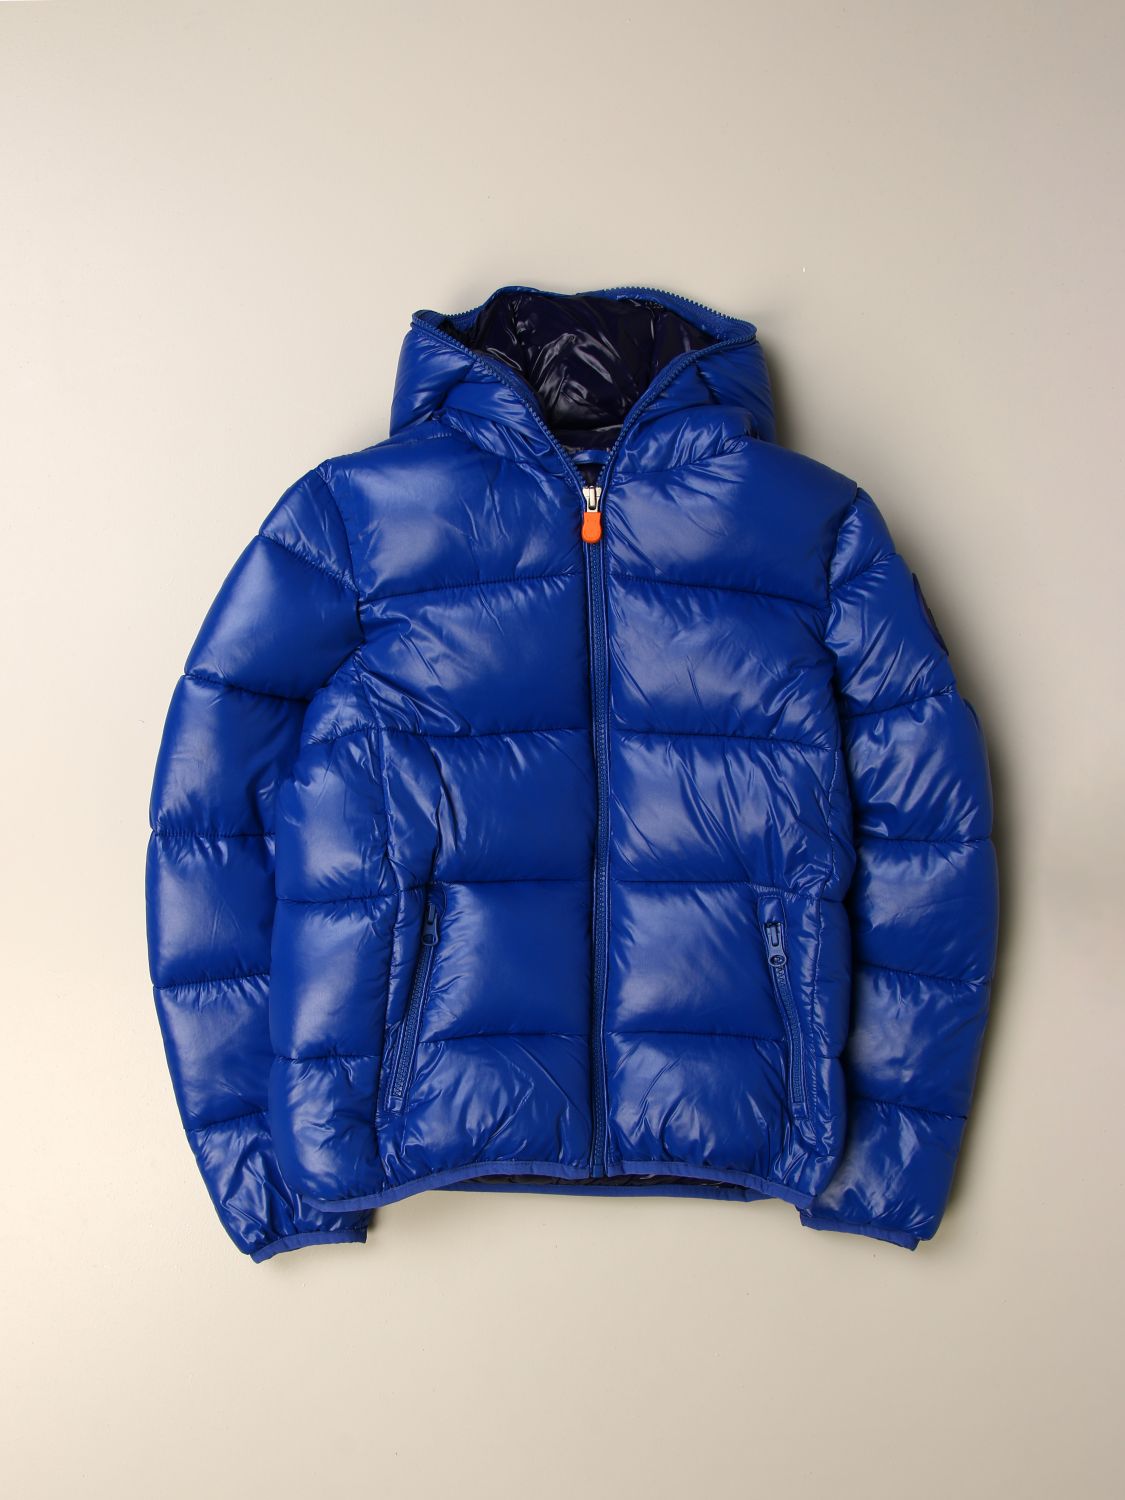 Save The Duck Outlet: jacket for boys - Blue 1 | Save The Duck jacket ...